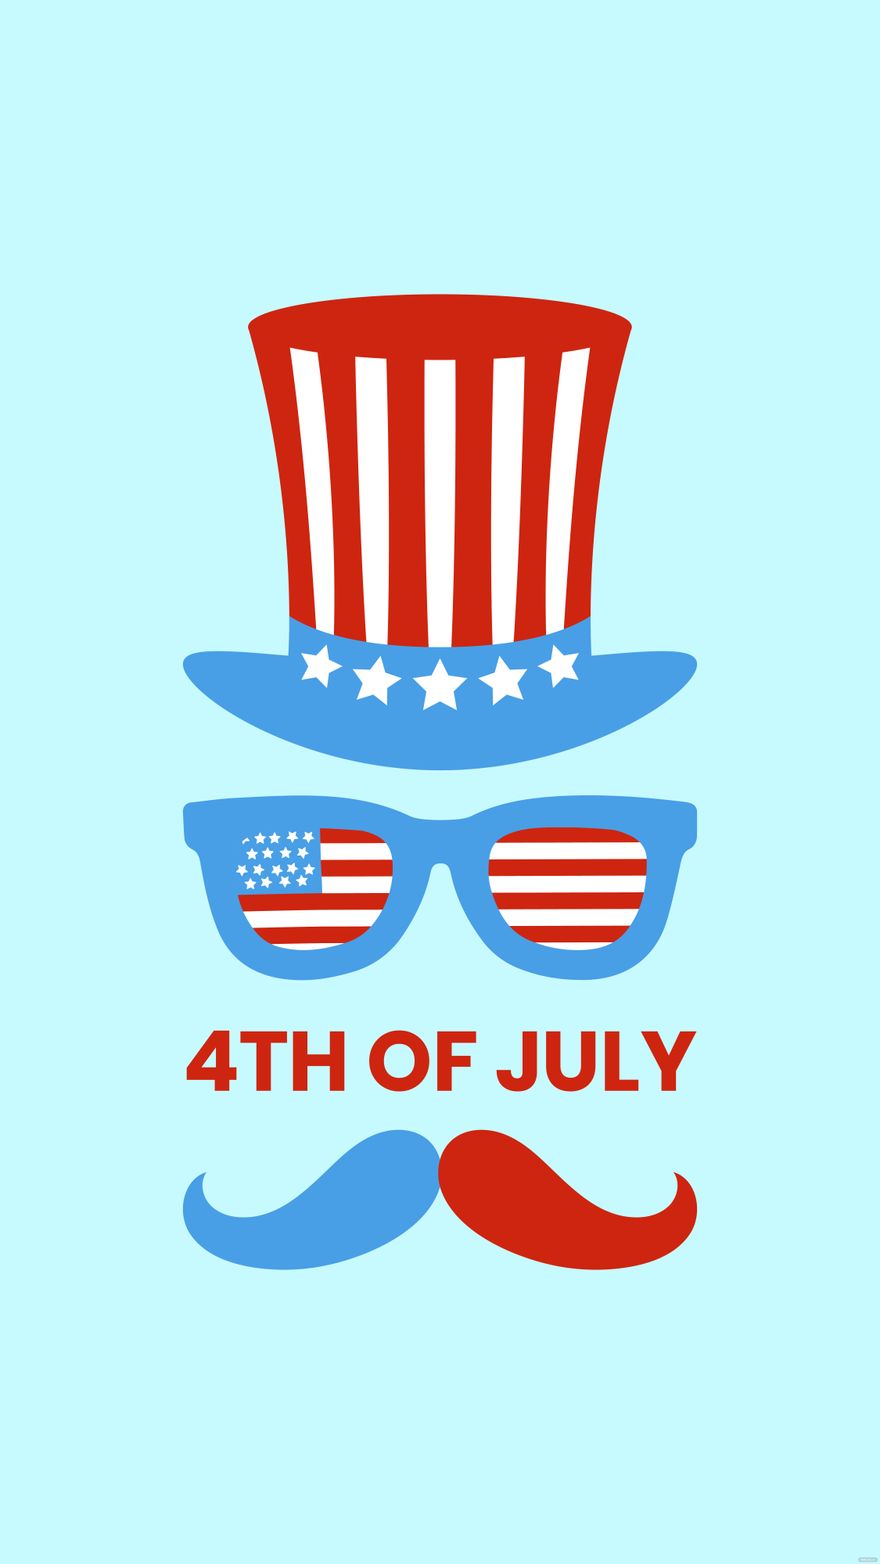 4th Of July Iphone Background in Illustrator, EPS, SVG, JPG, PNG